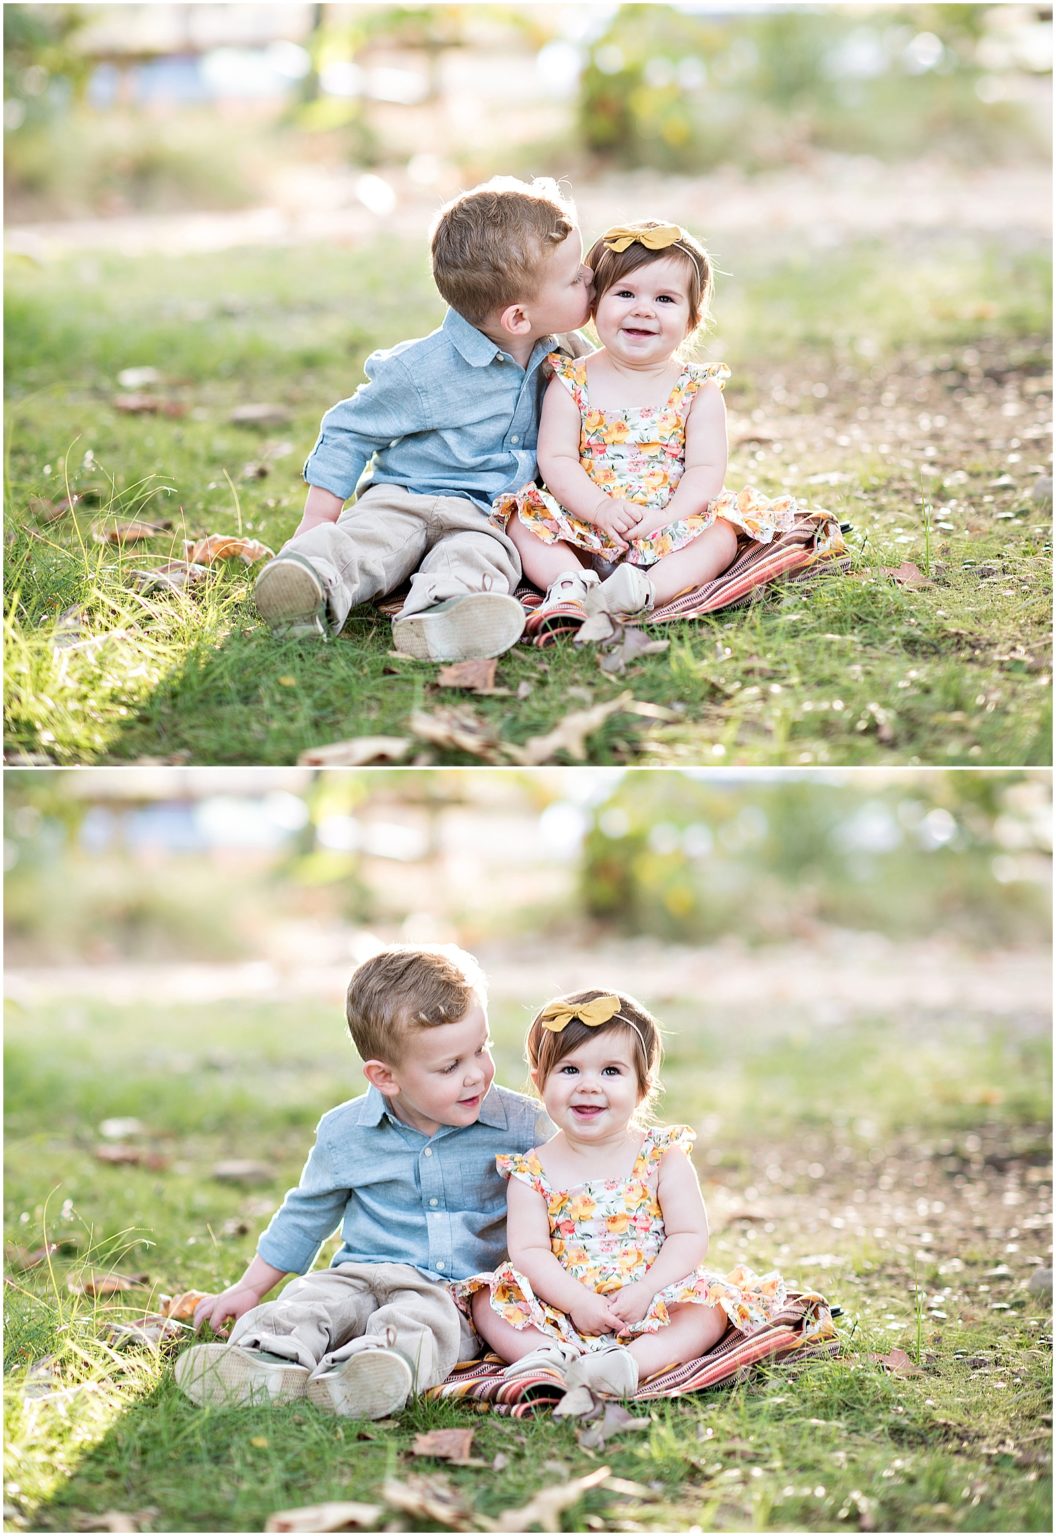 Outdoor Family Session | Orange County Family Photographer - Showit Blog